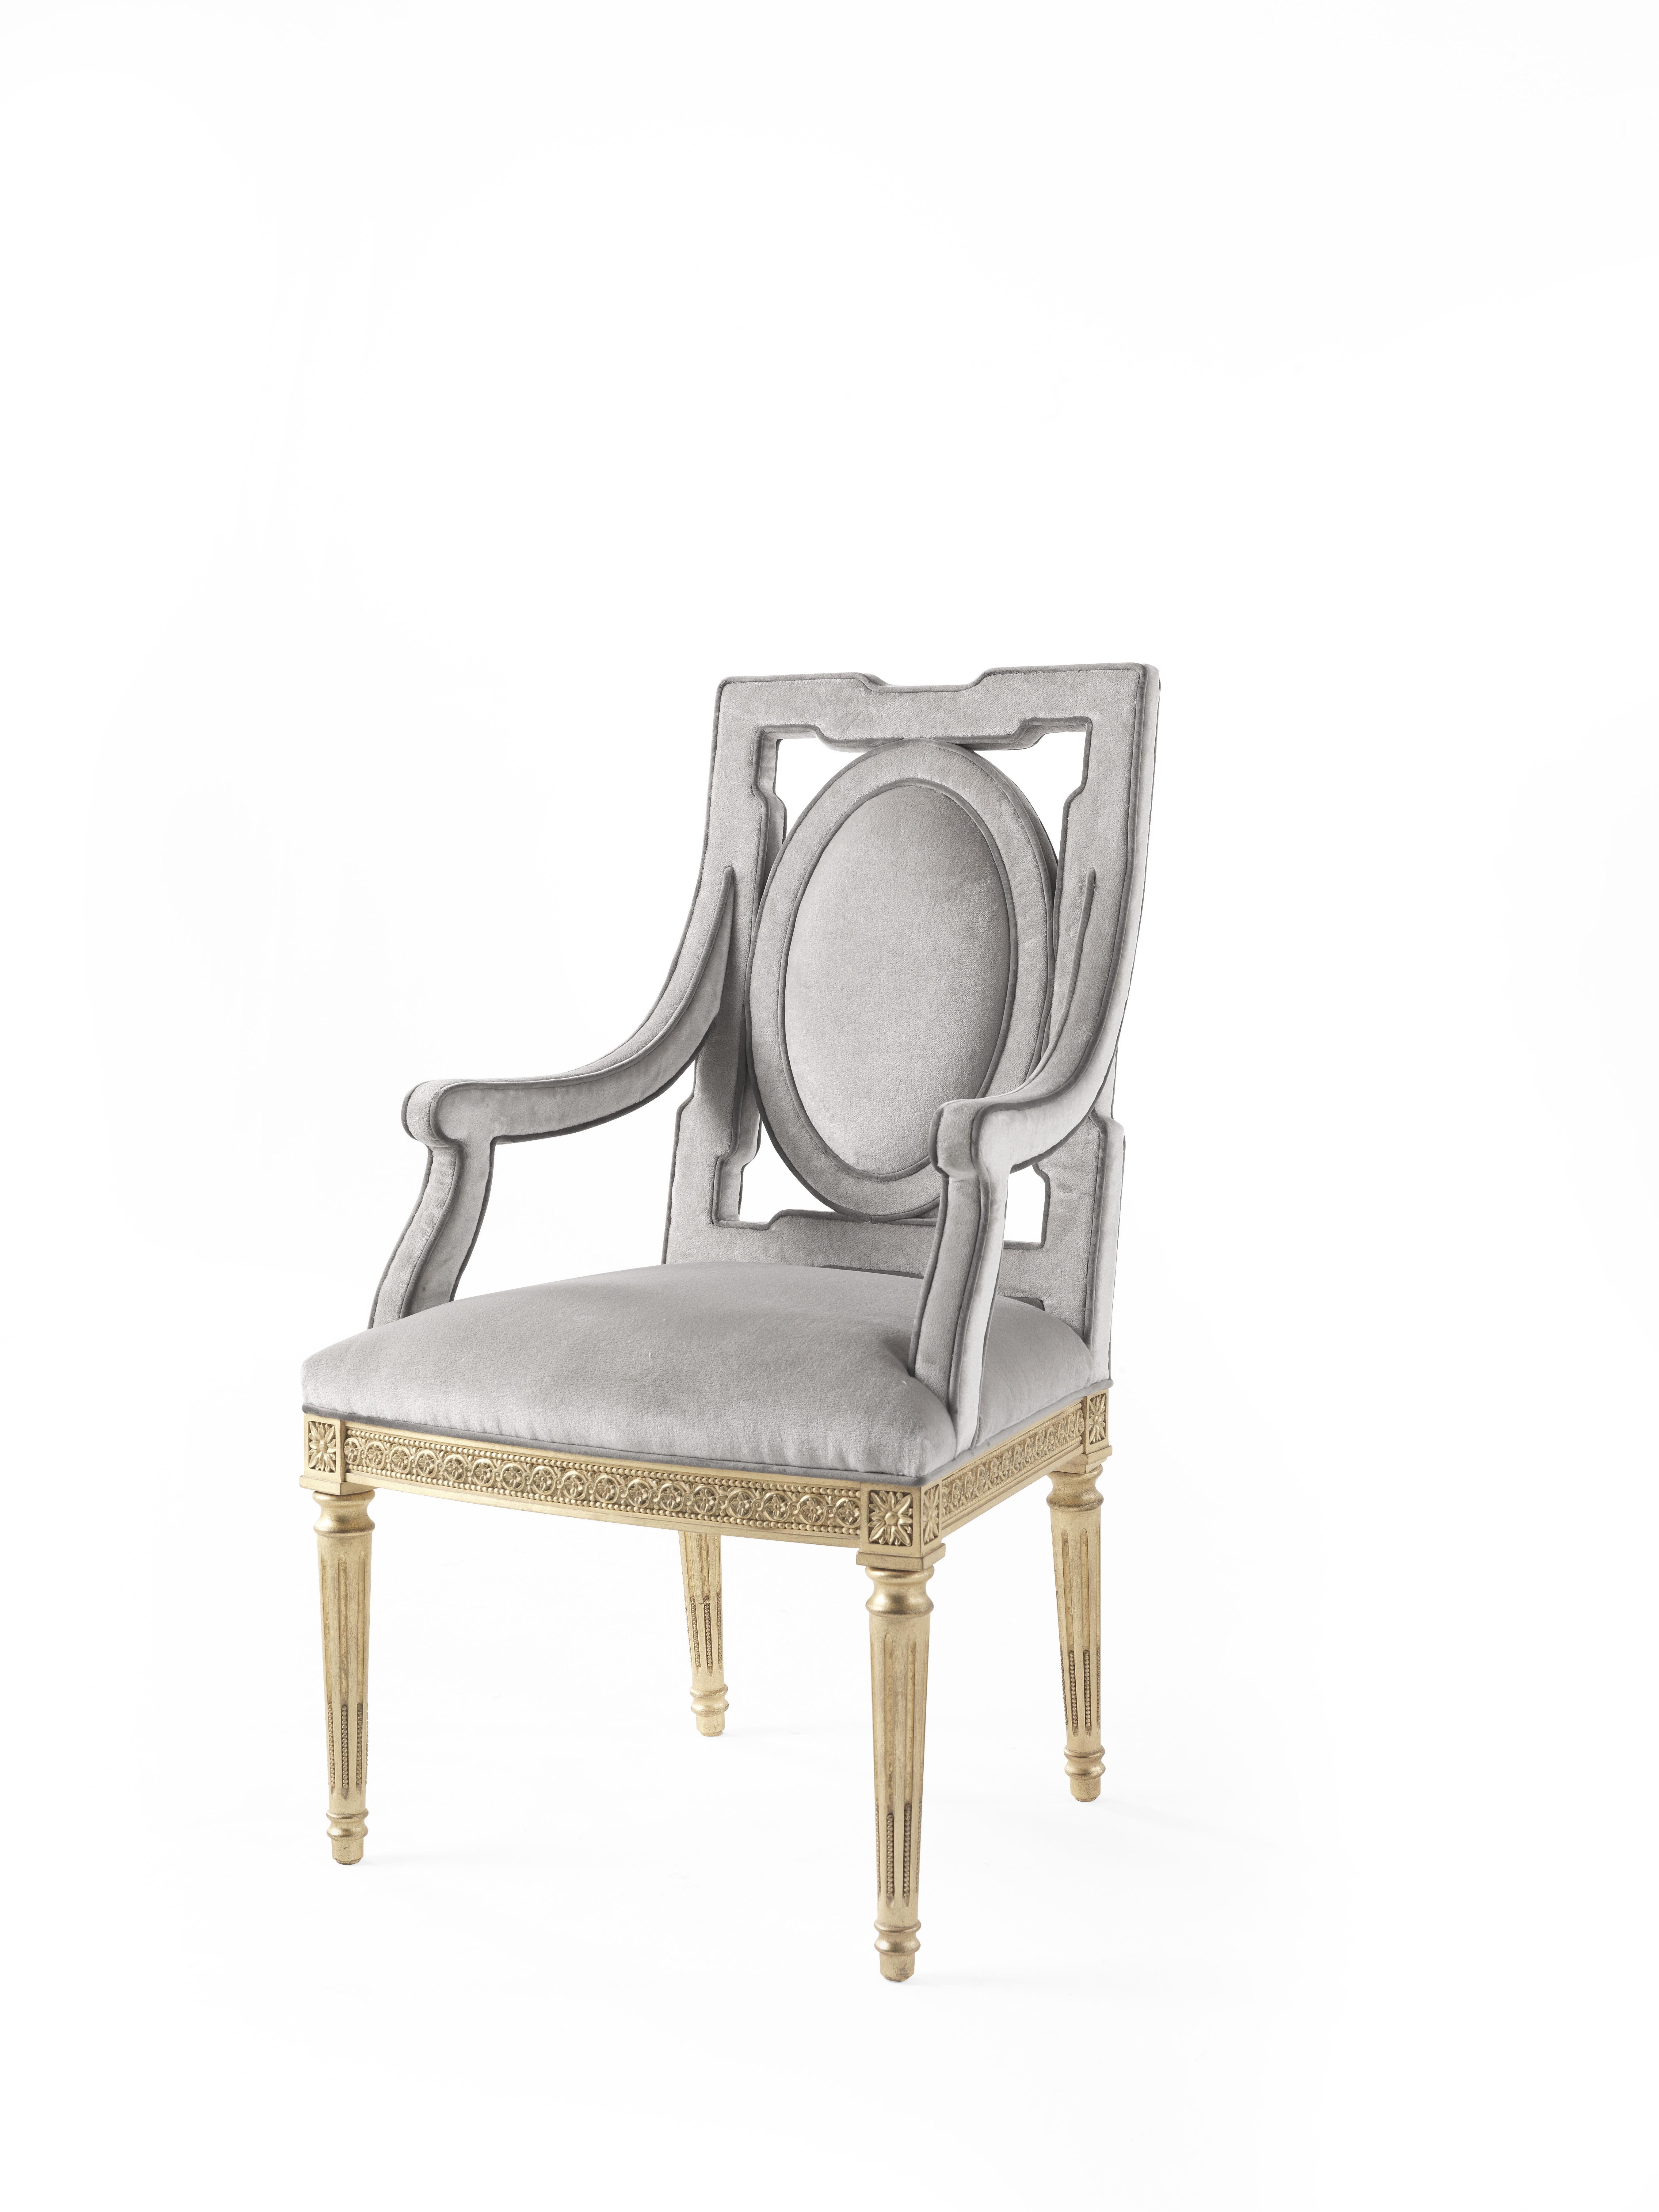 Satin is a classic model in Louis XVI style, revisited in a modern key thanks to the velvet upholstery in a delicate shade of grey. It features a hand-carved wooden structure with gold leaf finishing and a medallion backrest with piping that